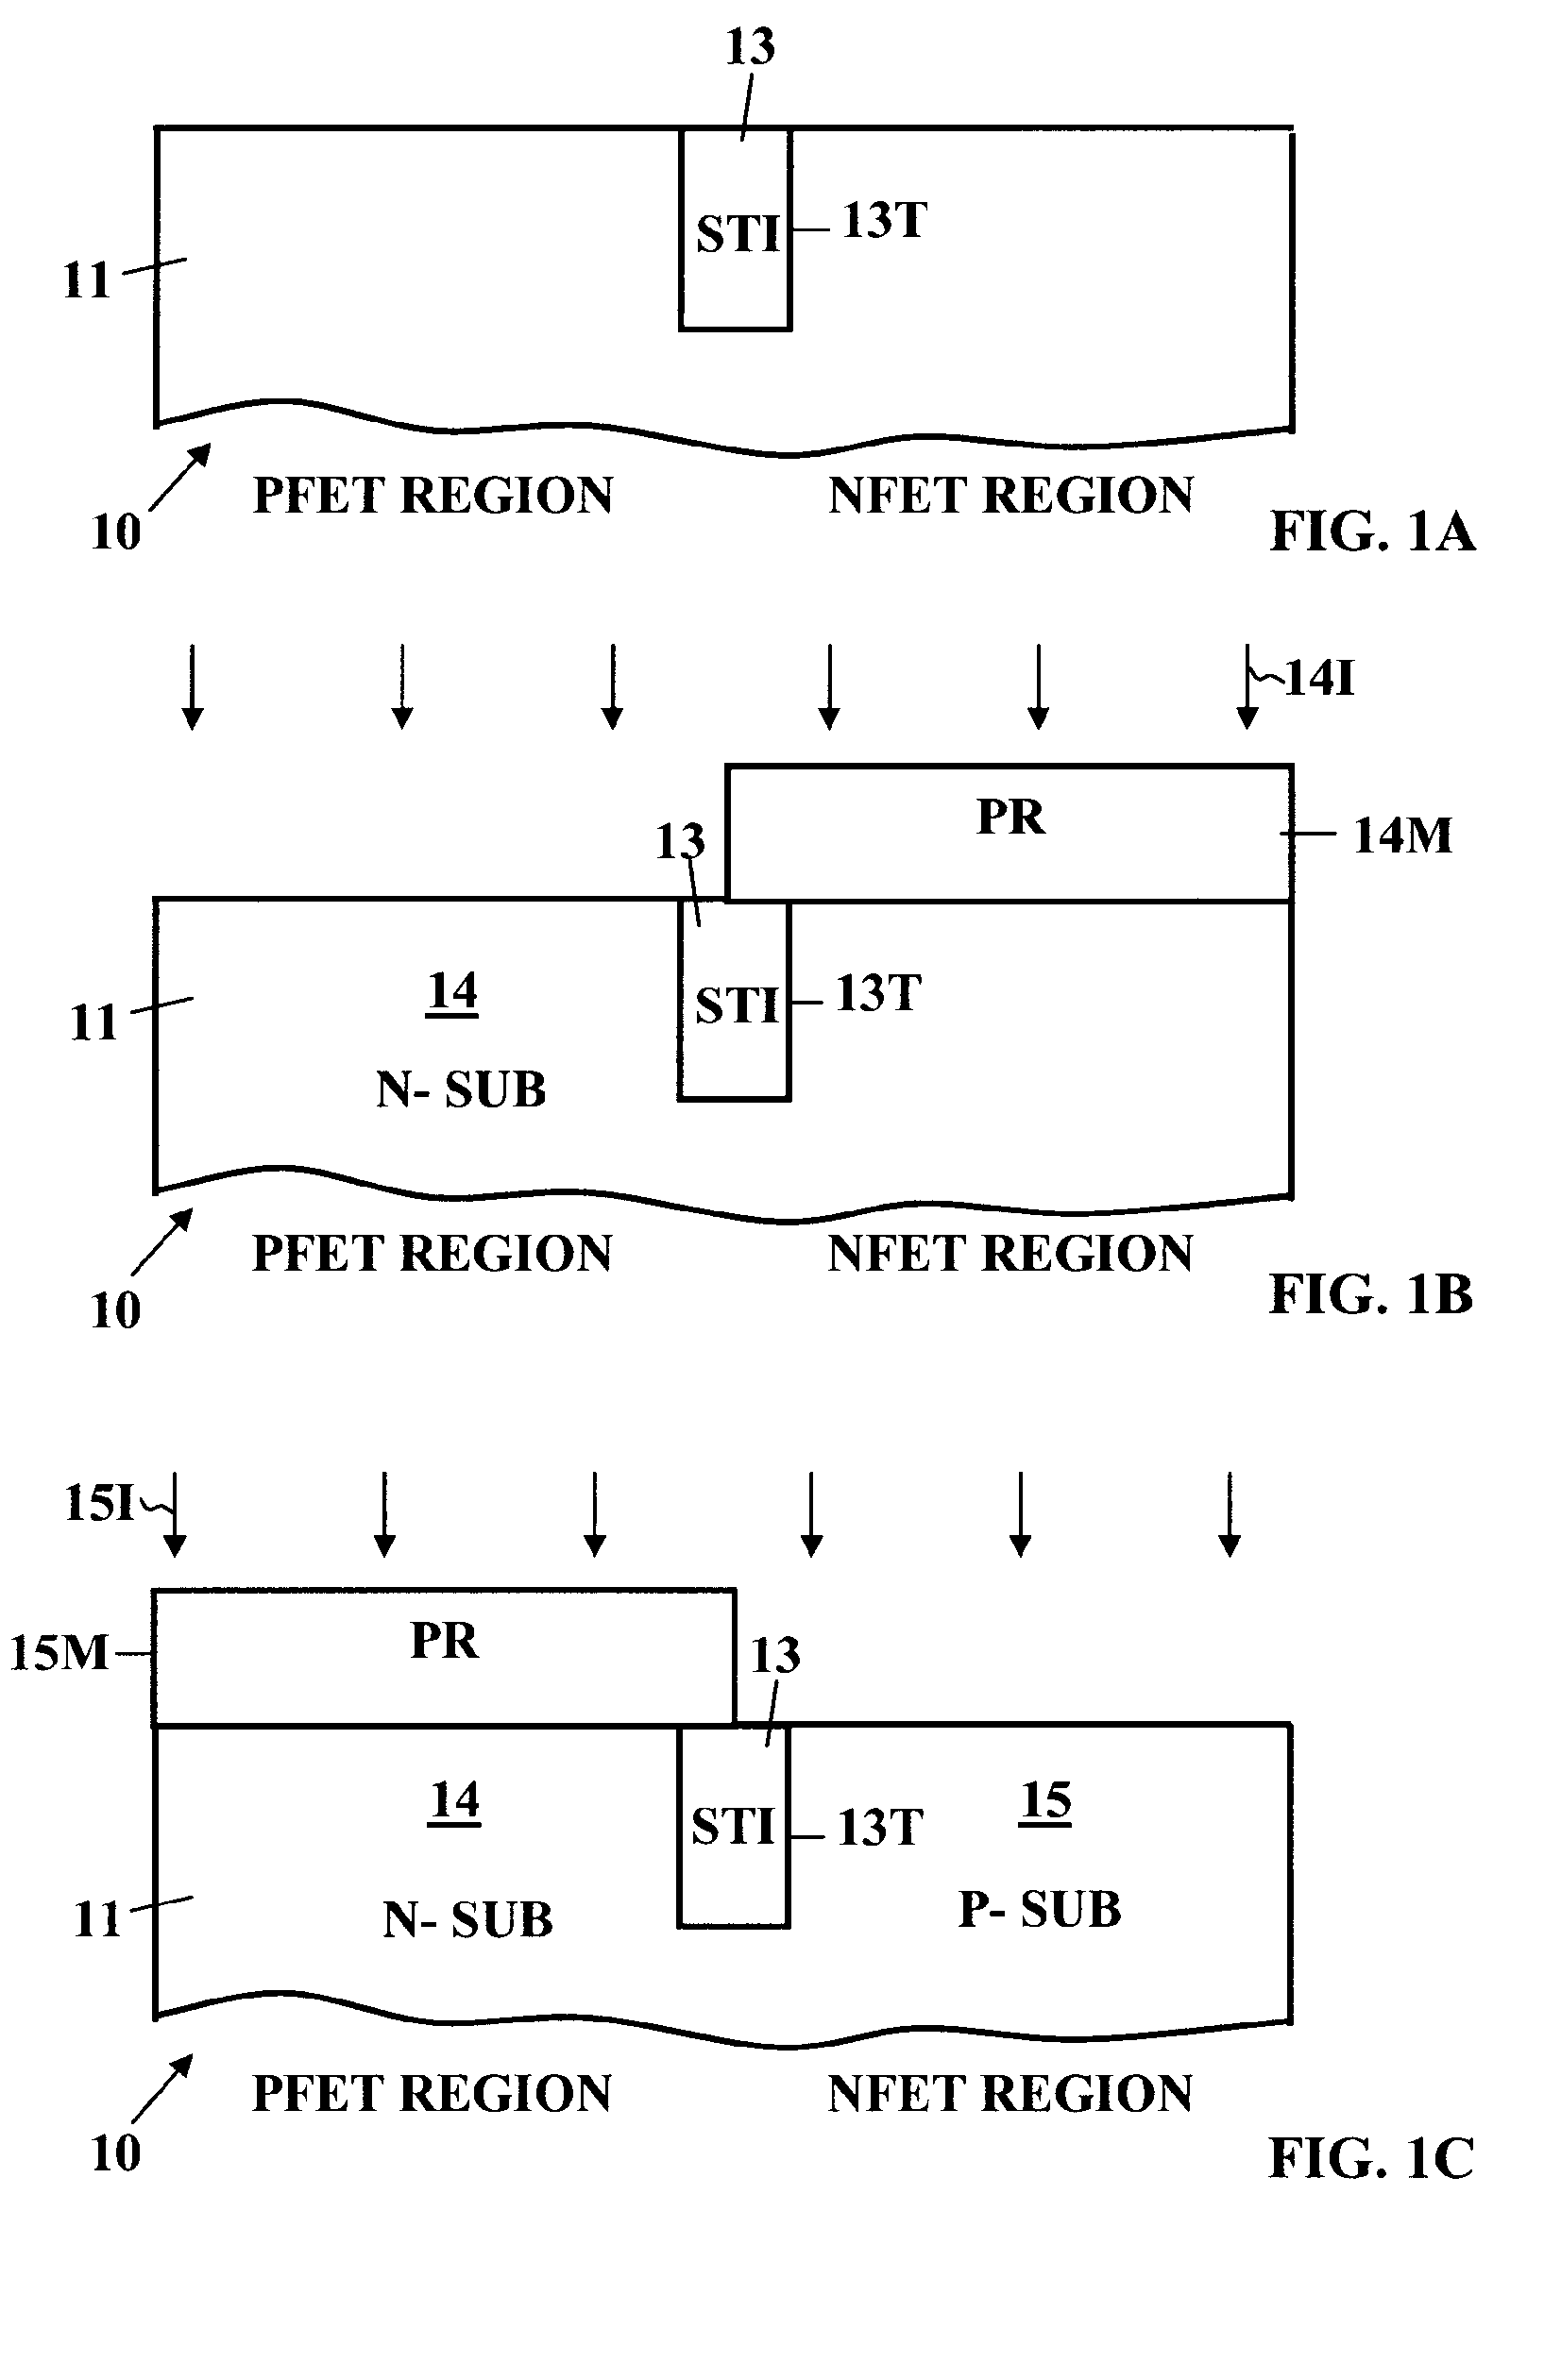 Ion implantation of nitrogen into semiconductor substrate prior to oxidation for offset spacer formation